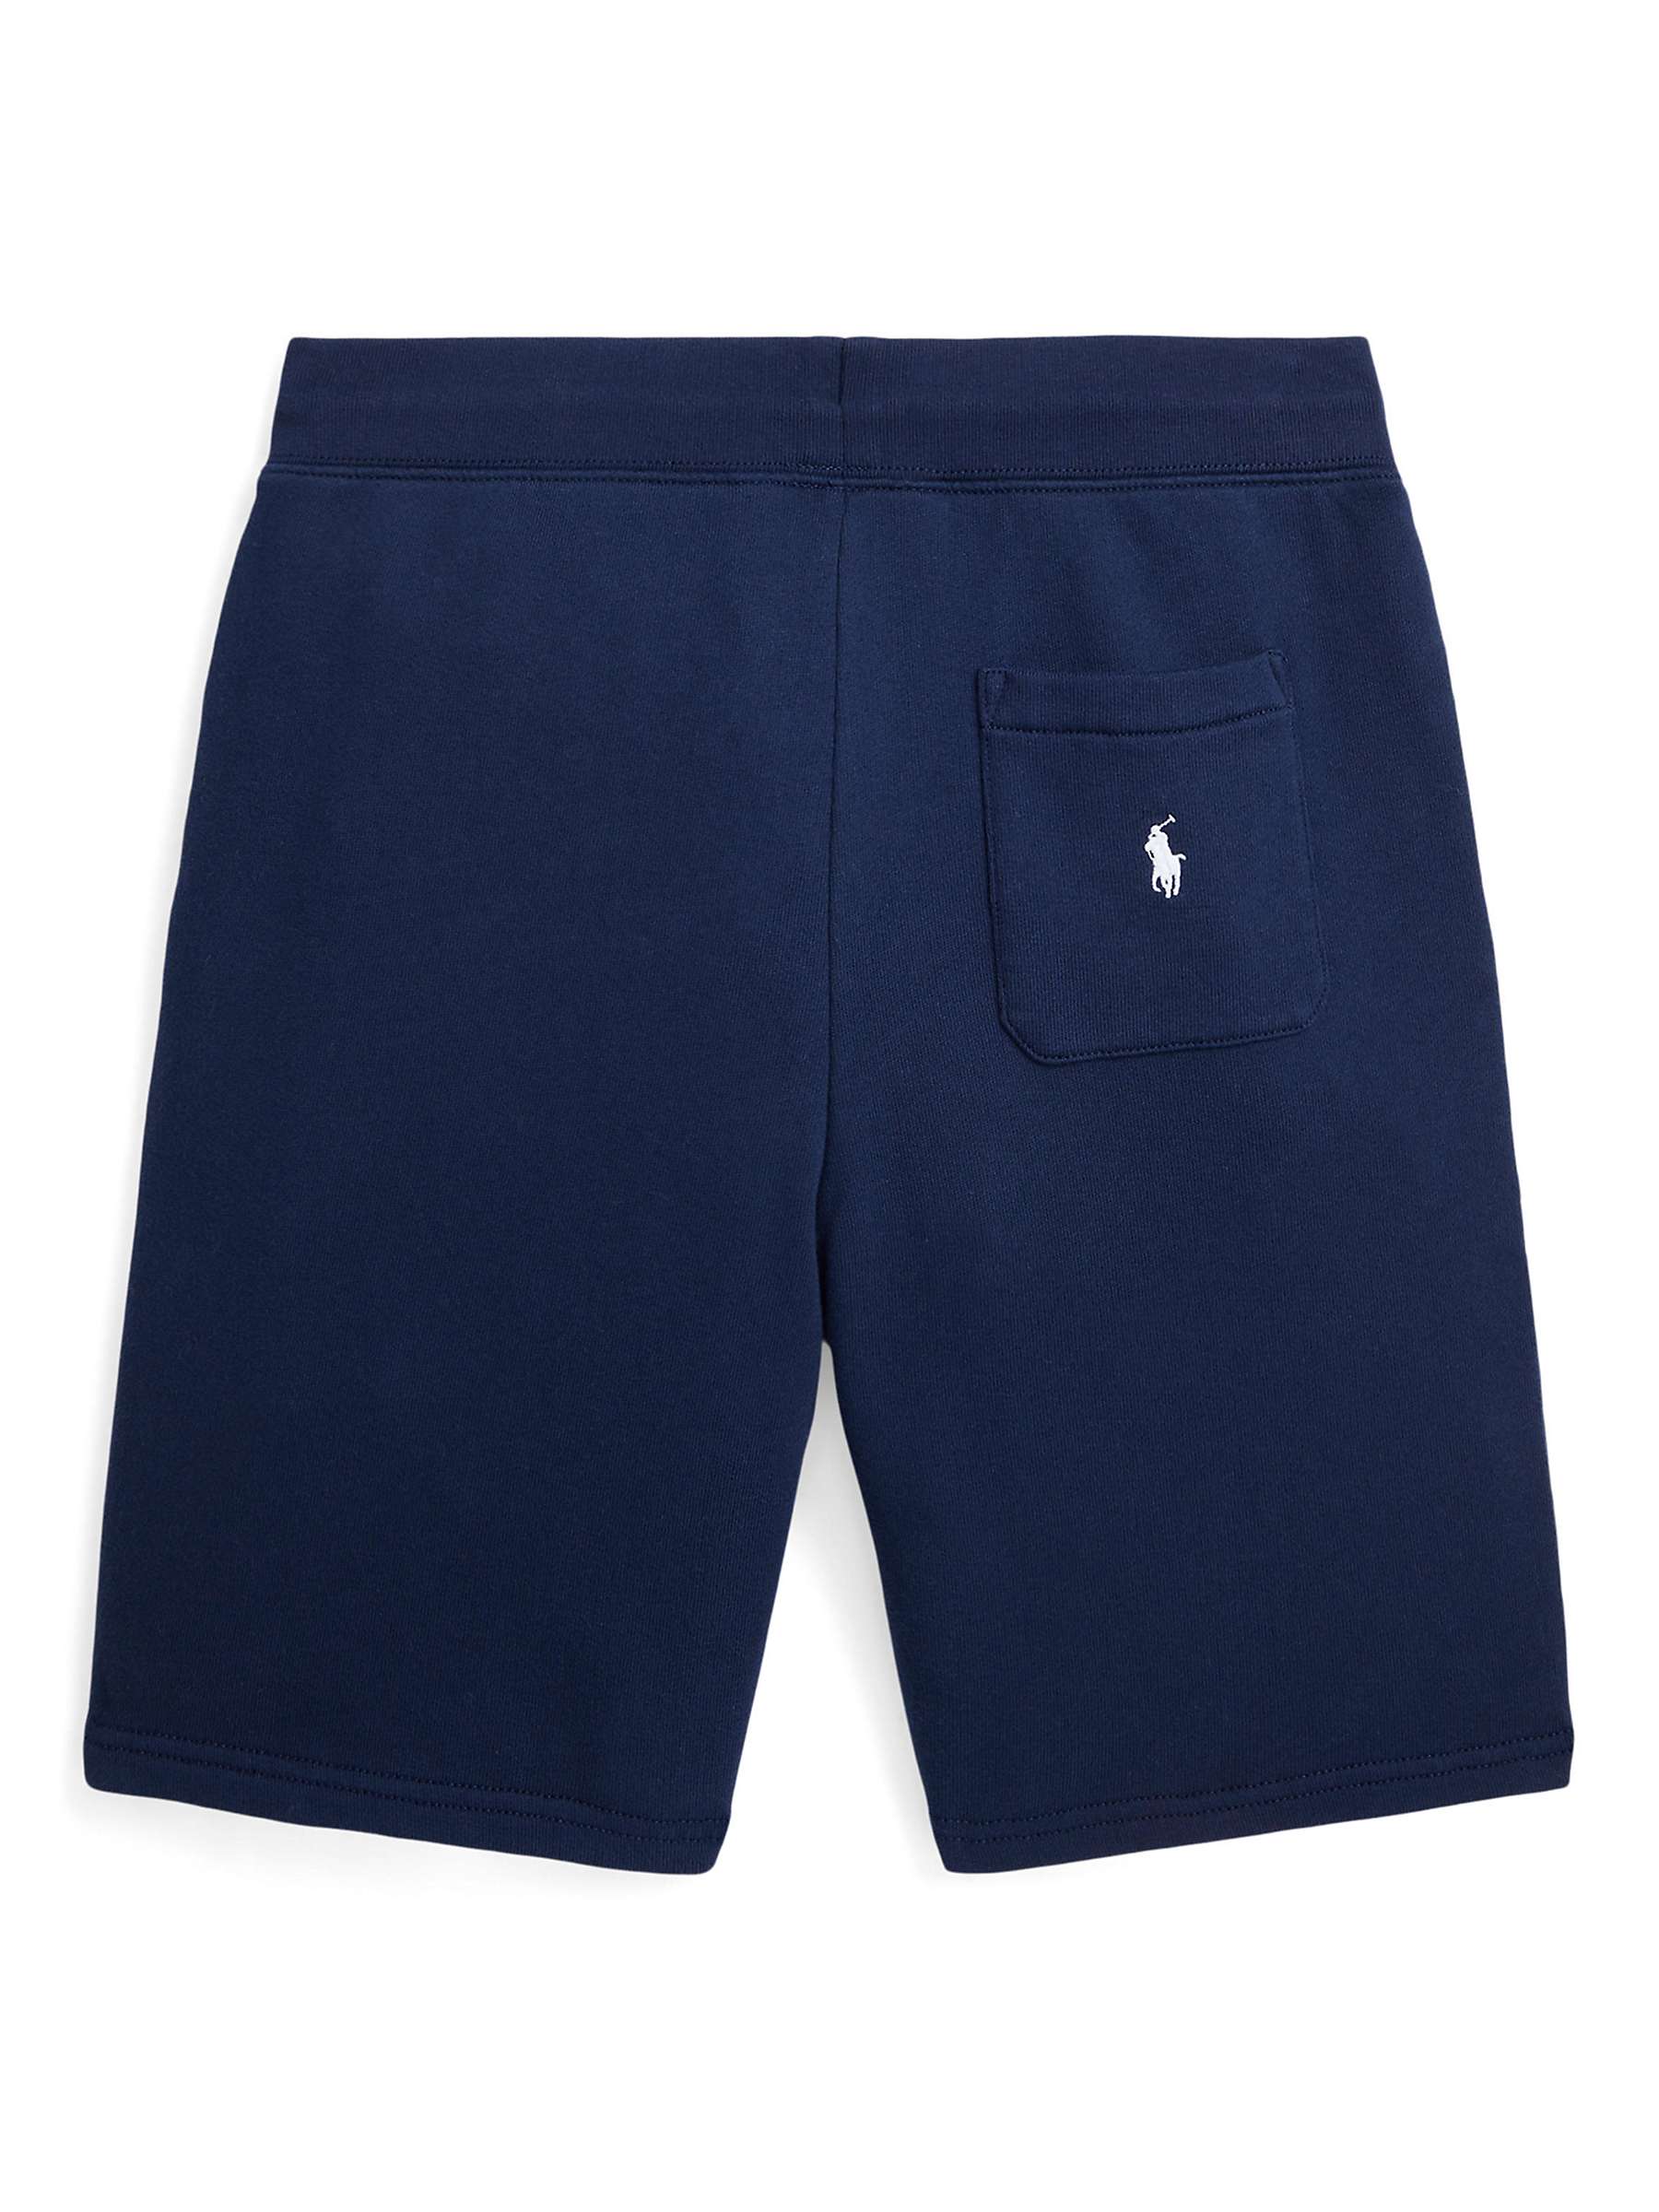 Buy Ralph Lauren Kids' Polo Athlectic Spa Terry Shorts, Blue Navy Online at johnlewis.com